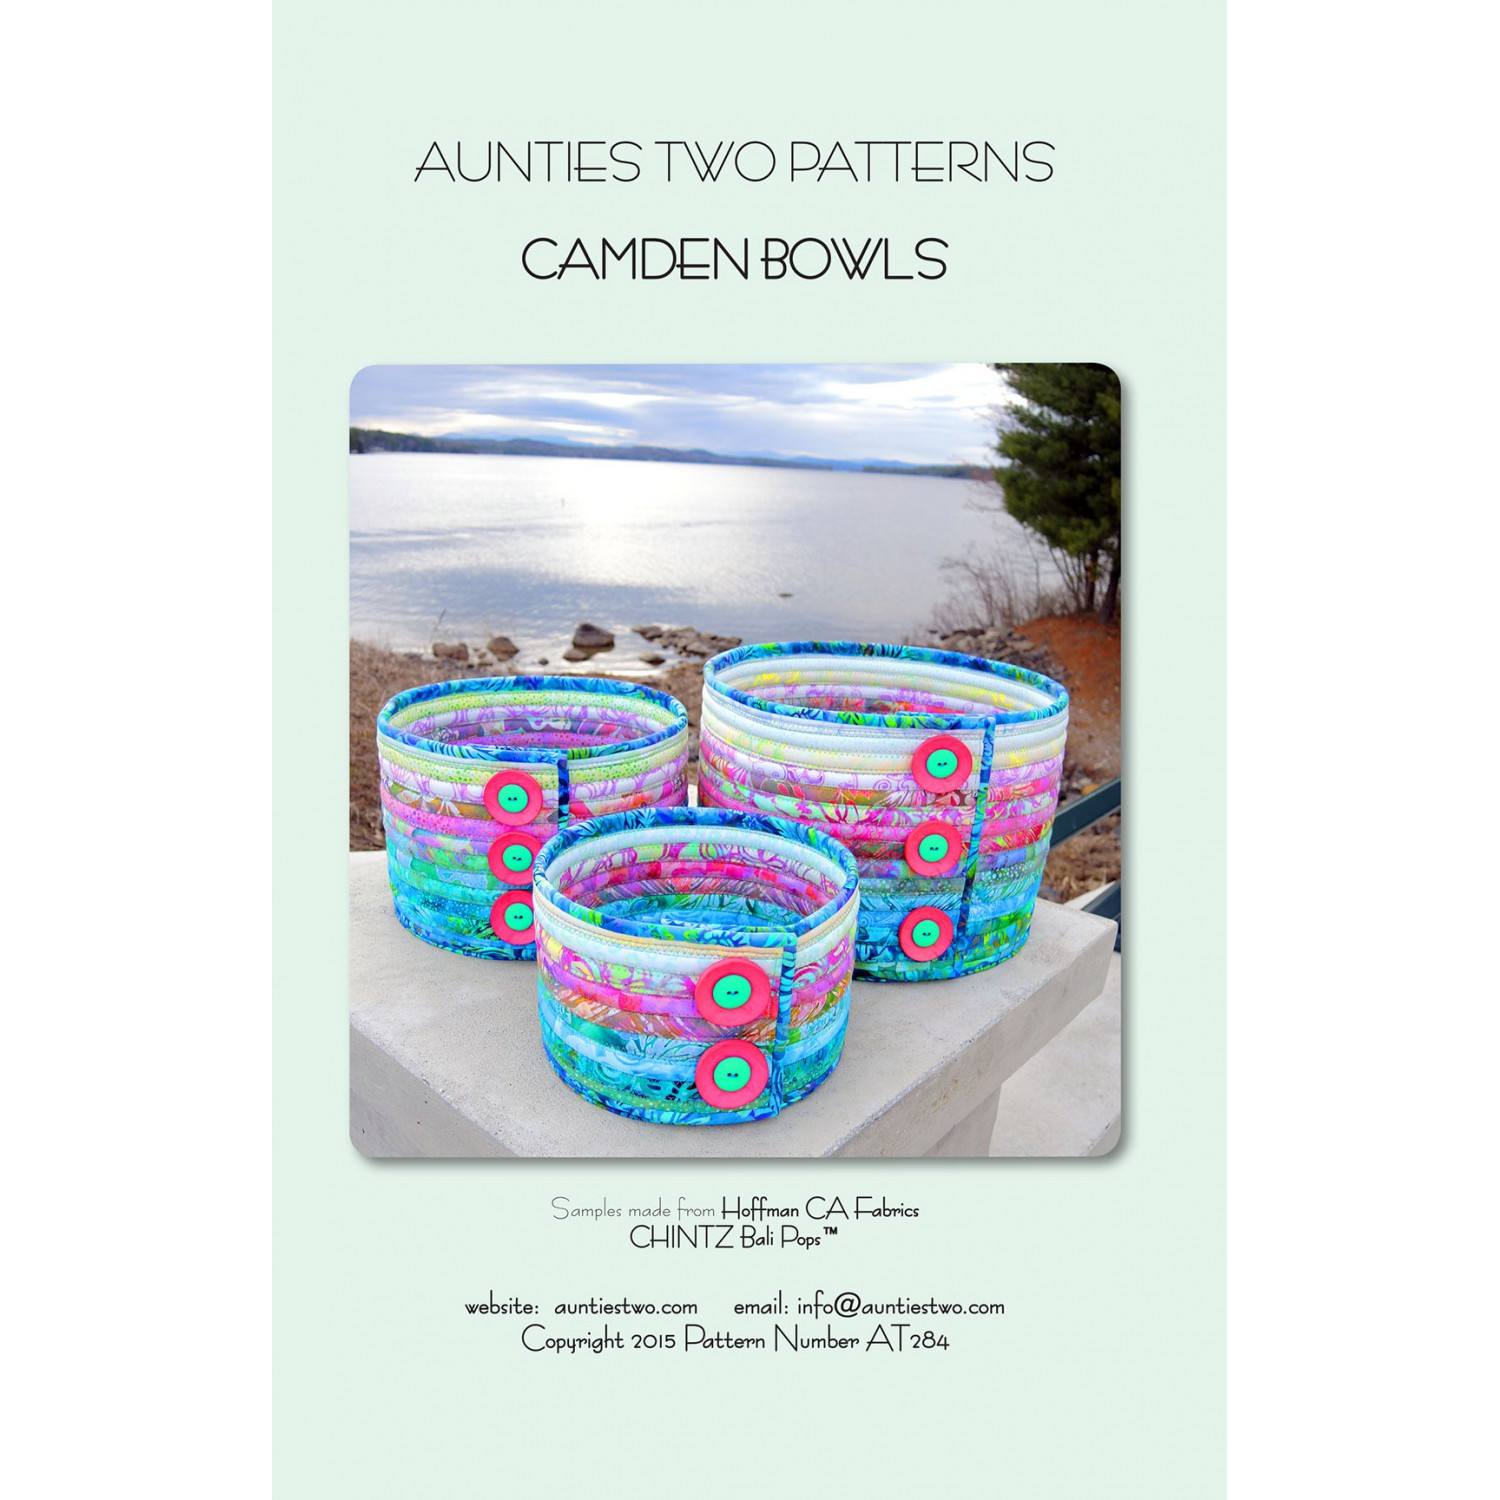 Camden Bowls Patterns, Aunties Two Patterns image # 35125